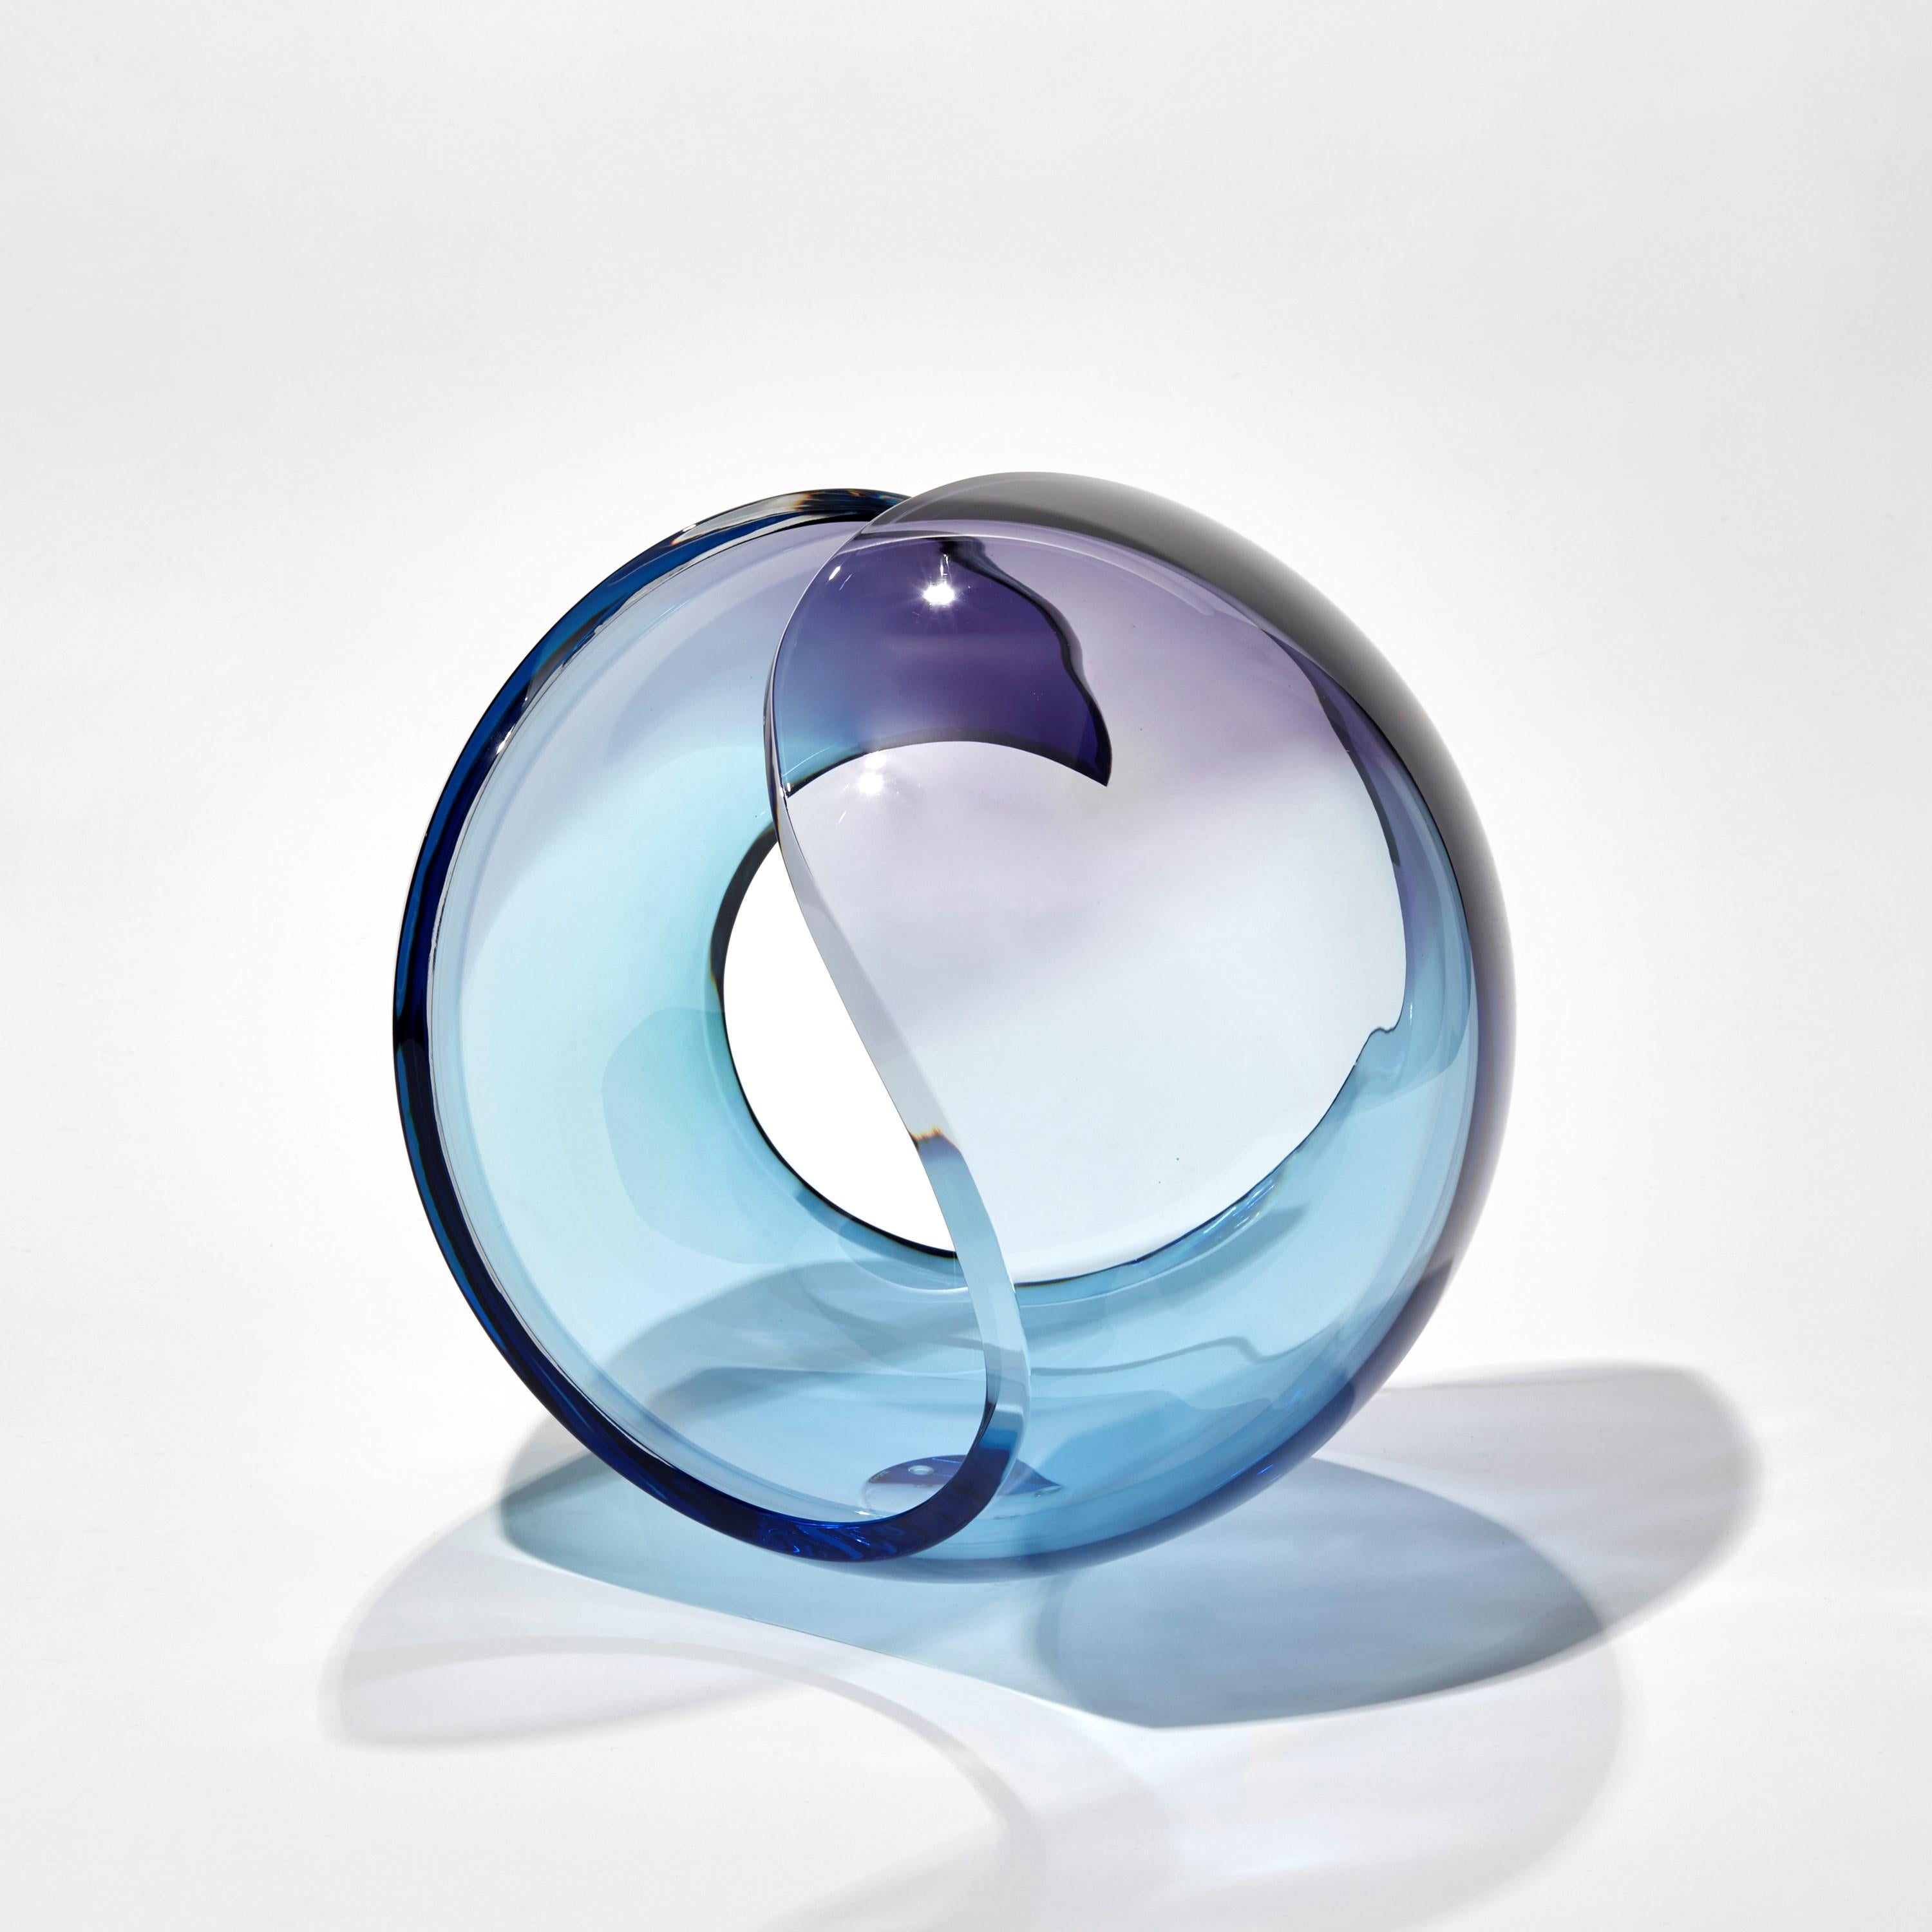 Organic Modern  Planet in Turquoise & Purple, an Abstract Glass Centrepiece by Lena Bergström For Sale